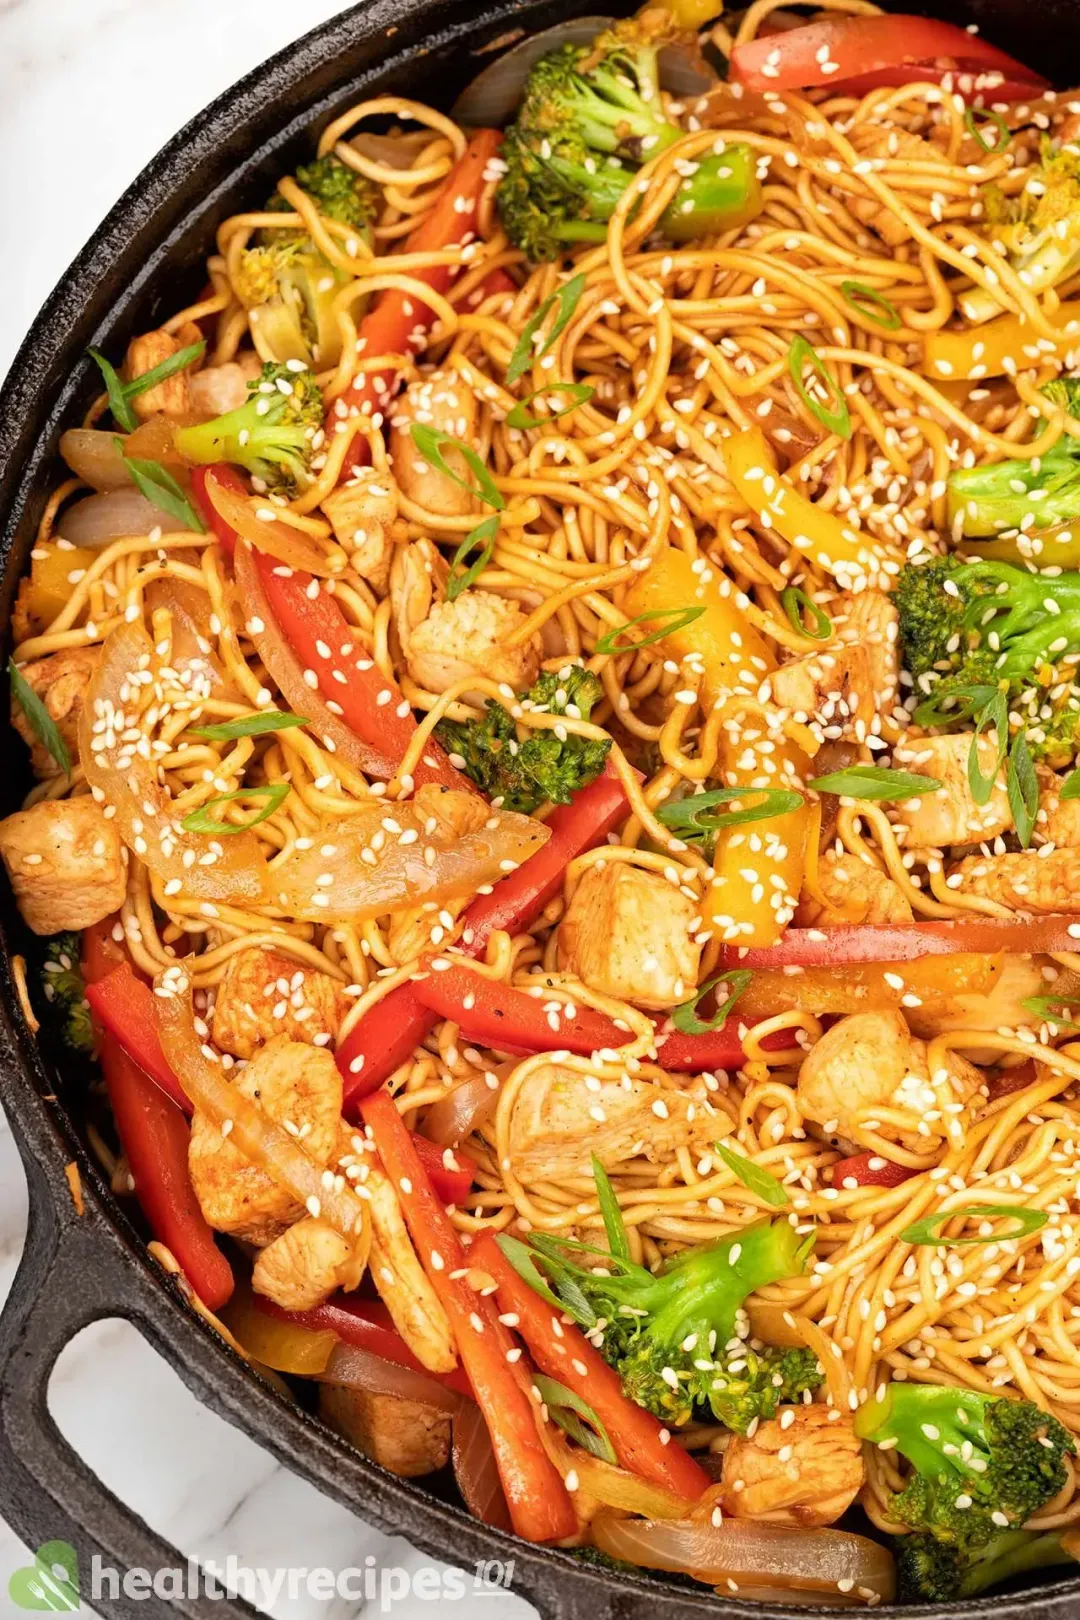 Chicken Stir Fry Noodles Recipe: A 15-Minute Healthy, Colorful Meal